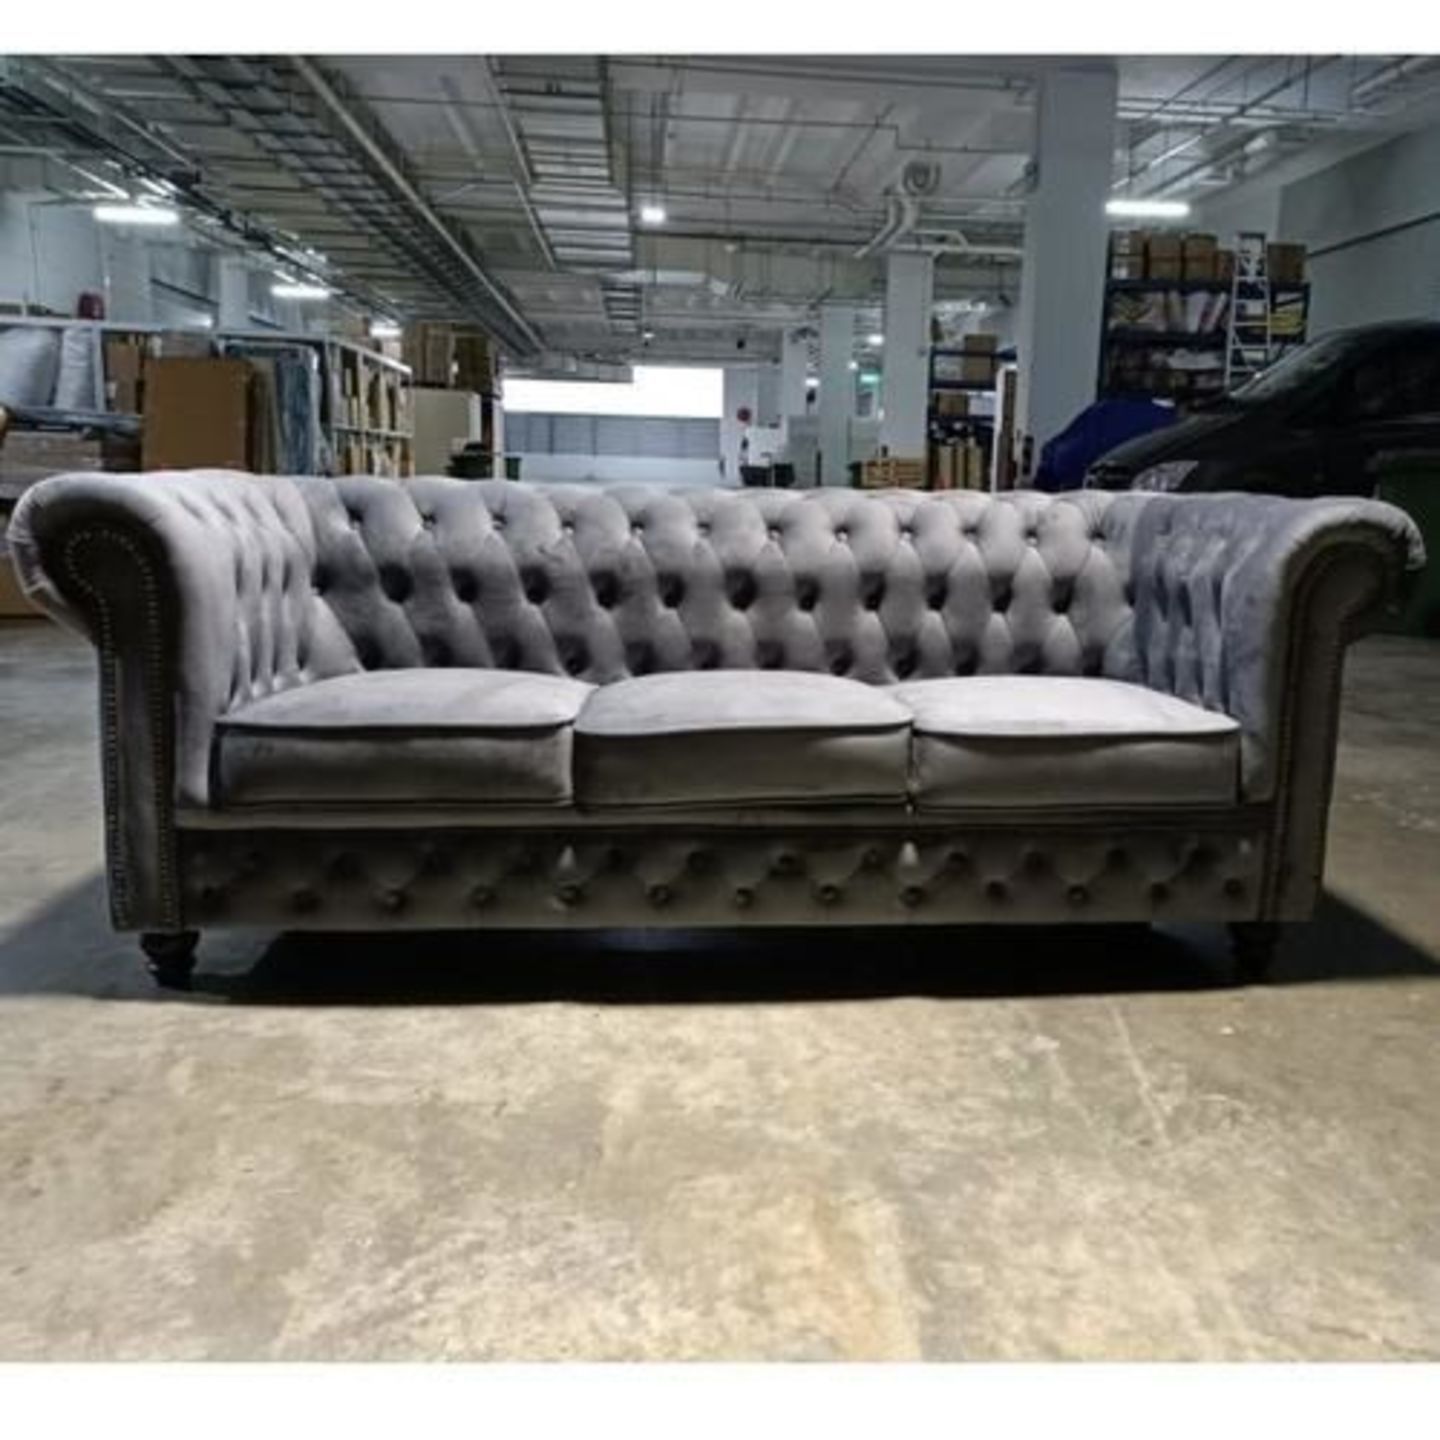 PRE ORDER SALVADORE X 3 Seater Chesterfield Sofa in STORM GREY VELVET - estimated delivery before April 2023, Hari Raya